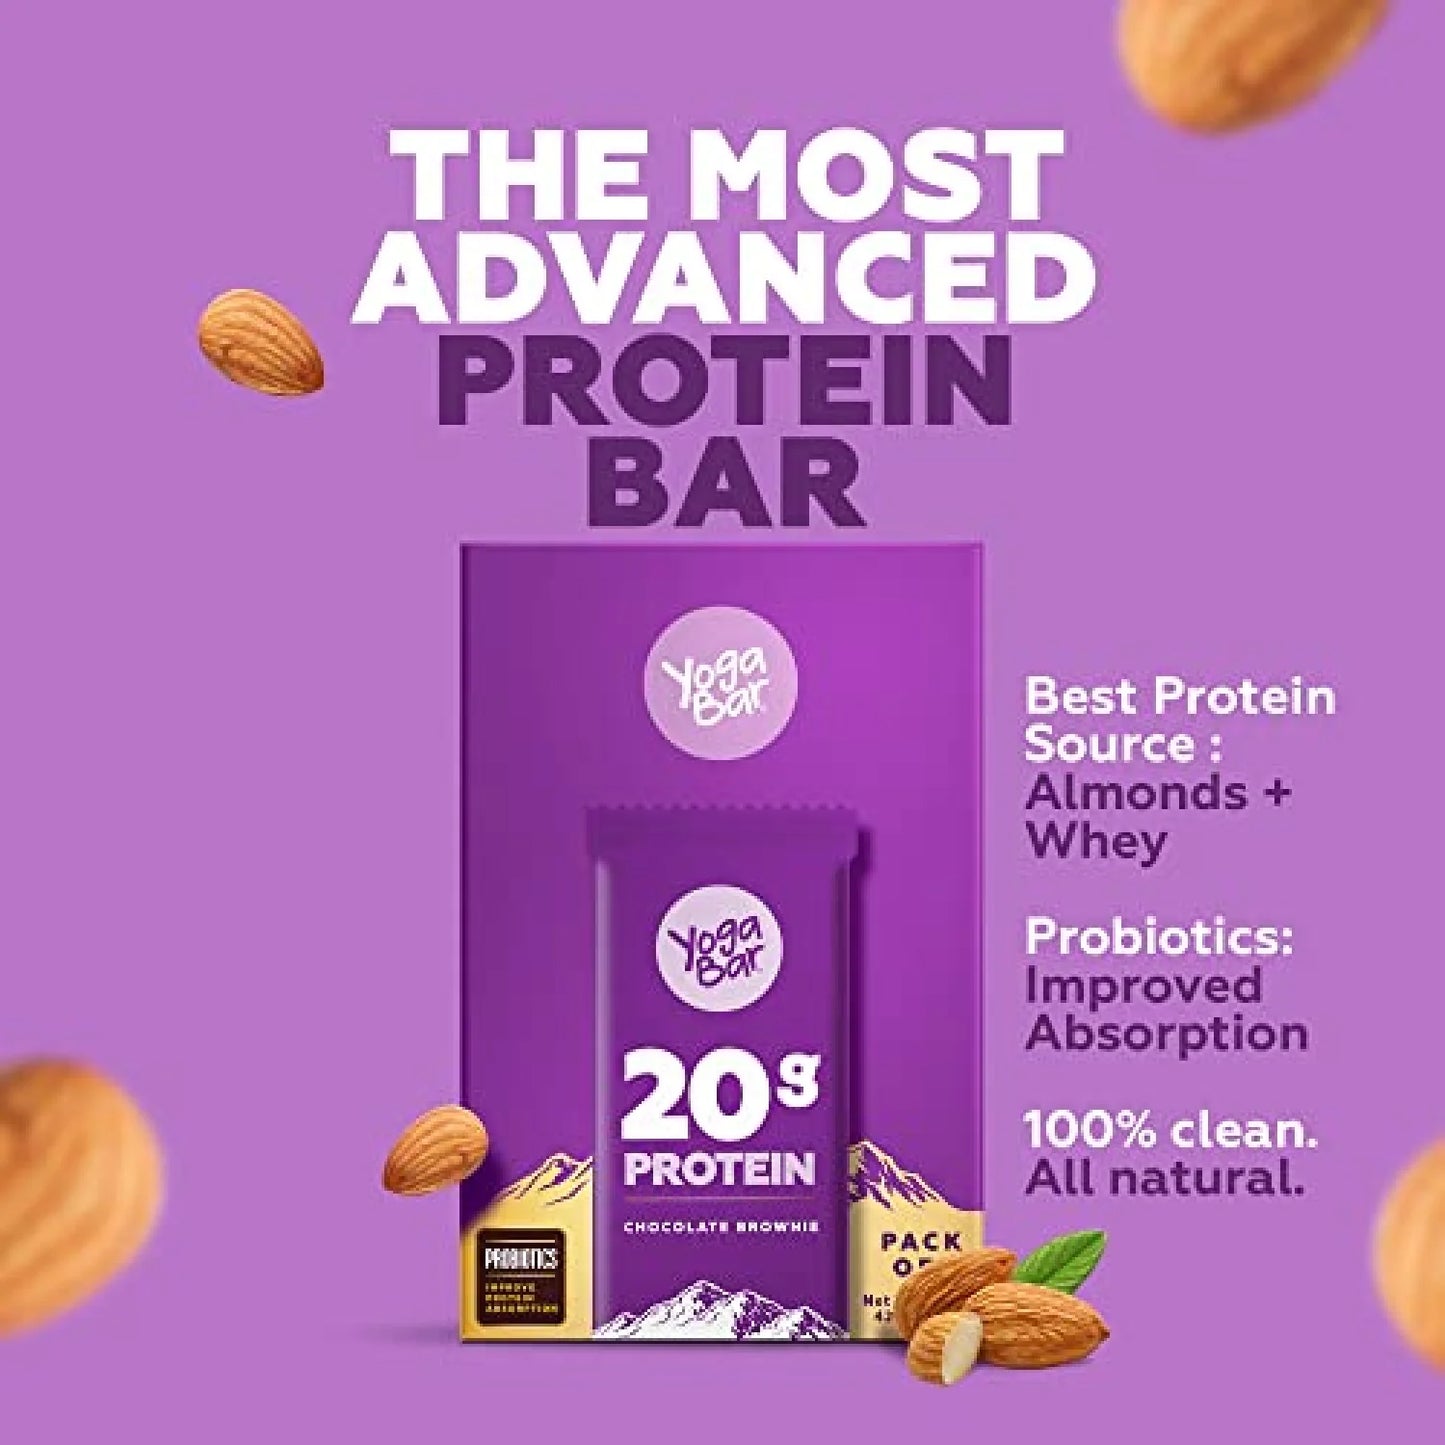 Chocolate Brownie 20g Protein Bar (Pack of 6)